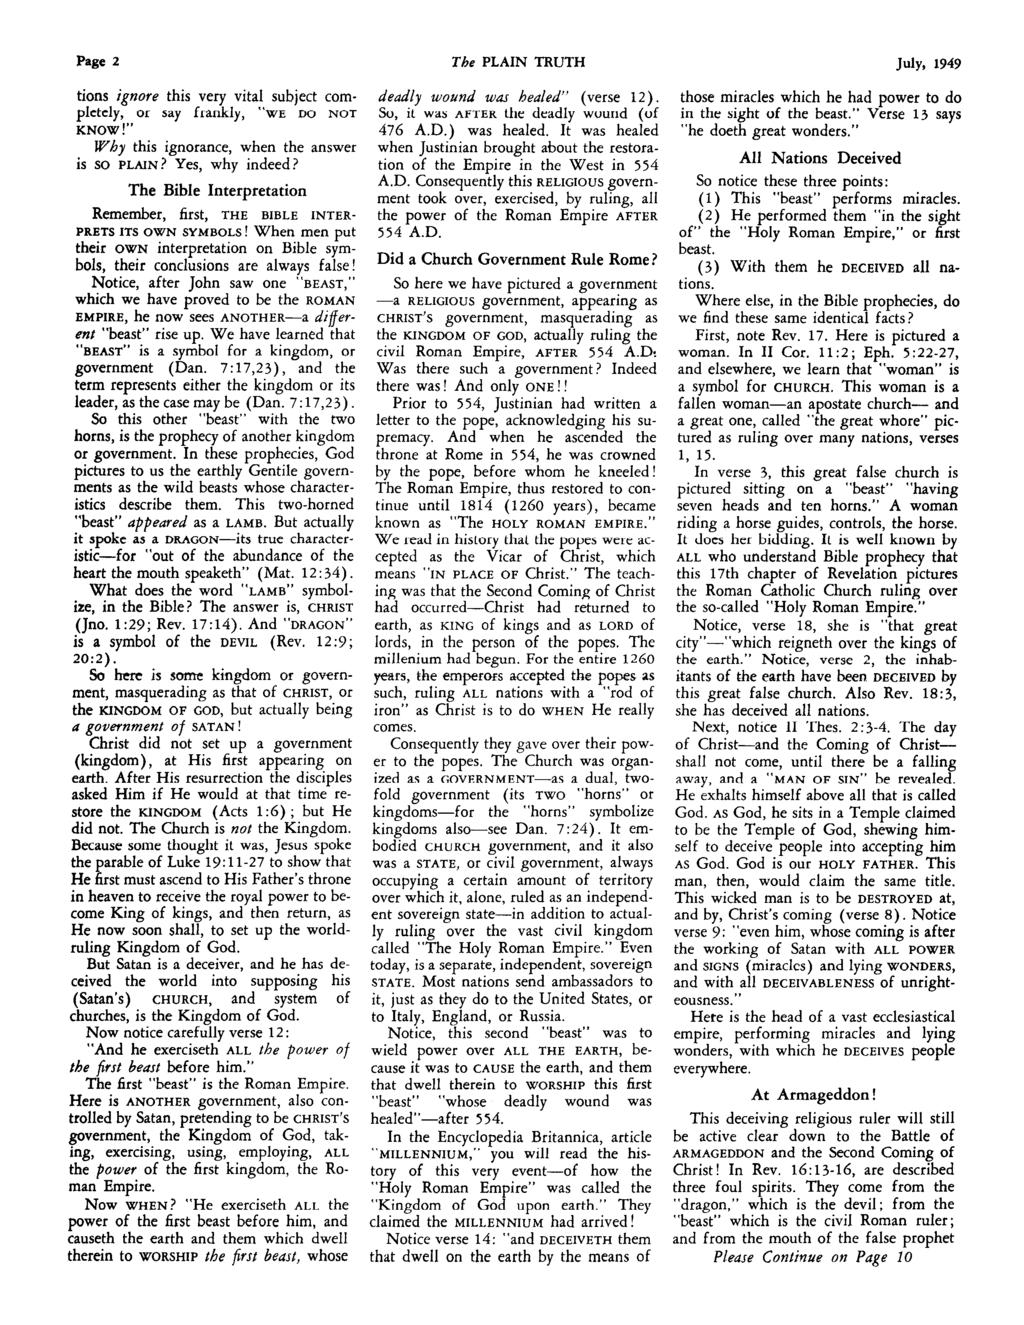 Page 2 The PLAIN TRUTH July, 1949 tions ignore this very vital subject complctcly, or say fiankly, WE DO NOT KNOW! Why this ignorance, when the answer is SO PLAIN? Yes, why indeed?